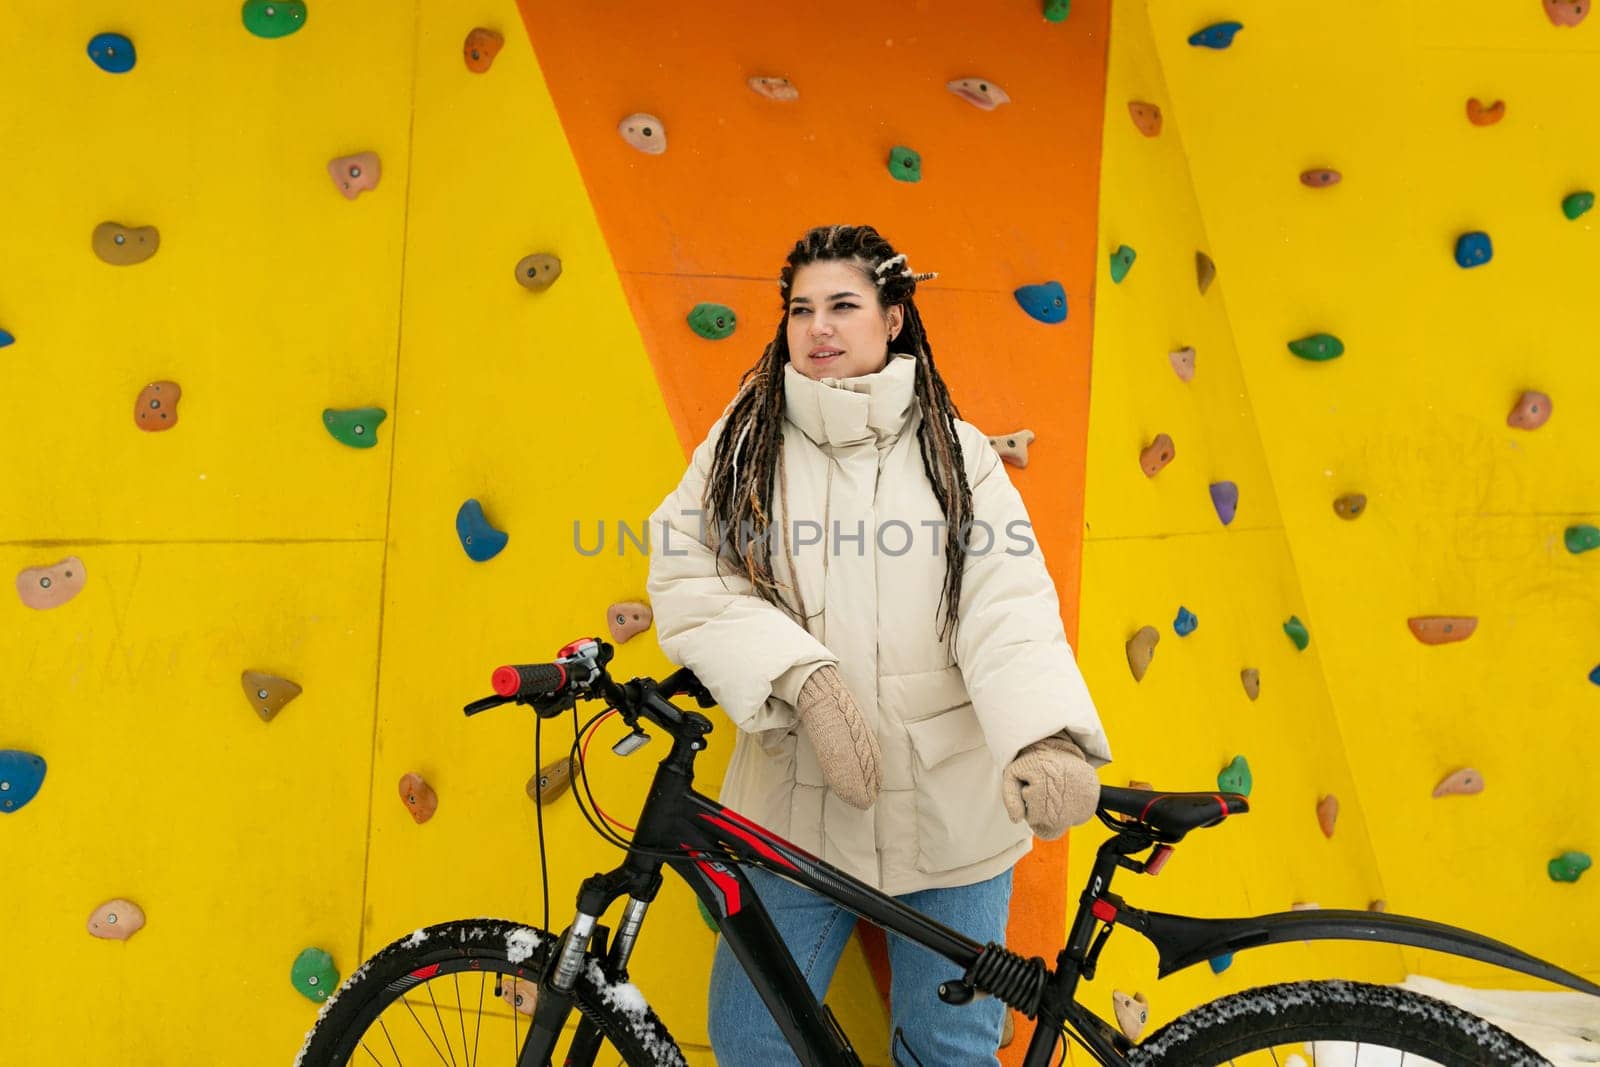 A woman stands next to a bicycle in front of a towering climbing wall. She appears ready for a physical challenge, with climbing gear visible. The scene suggests a combination of outdoor activity and adventure.